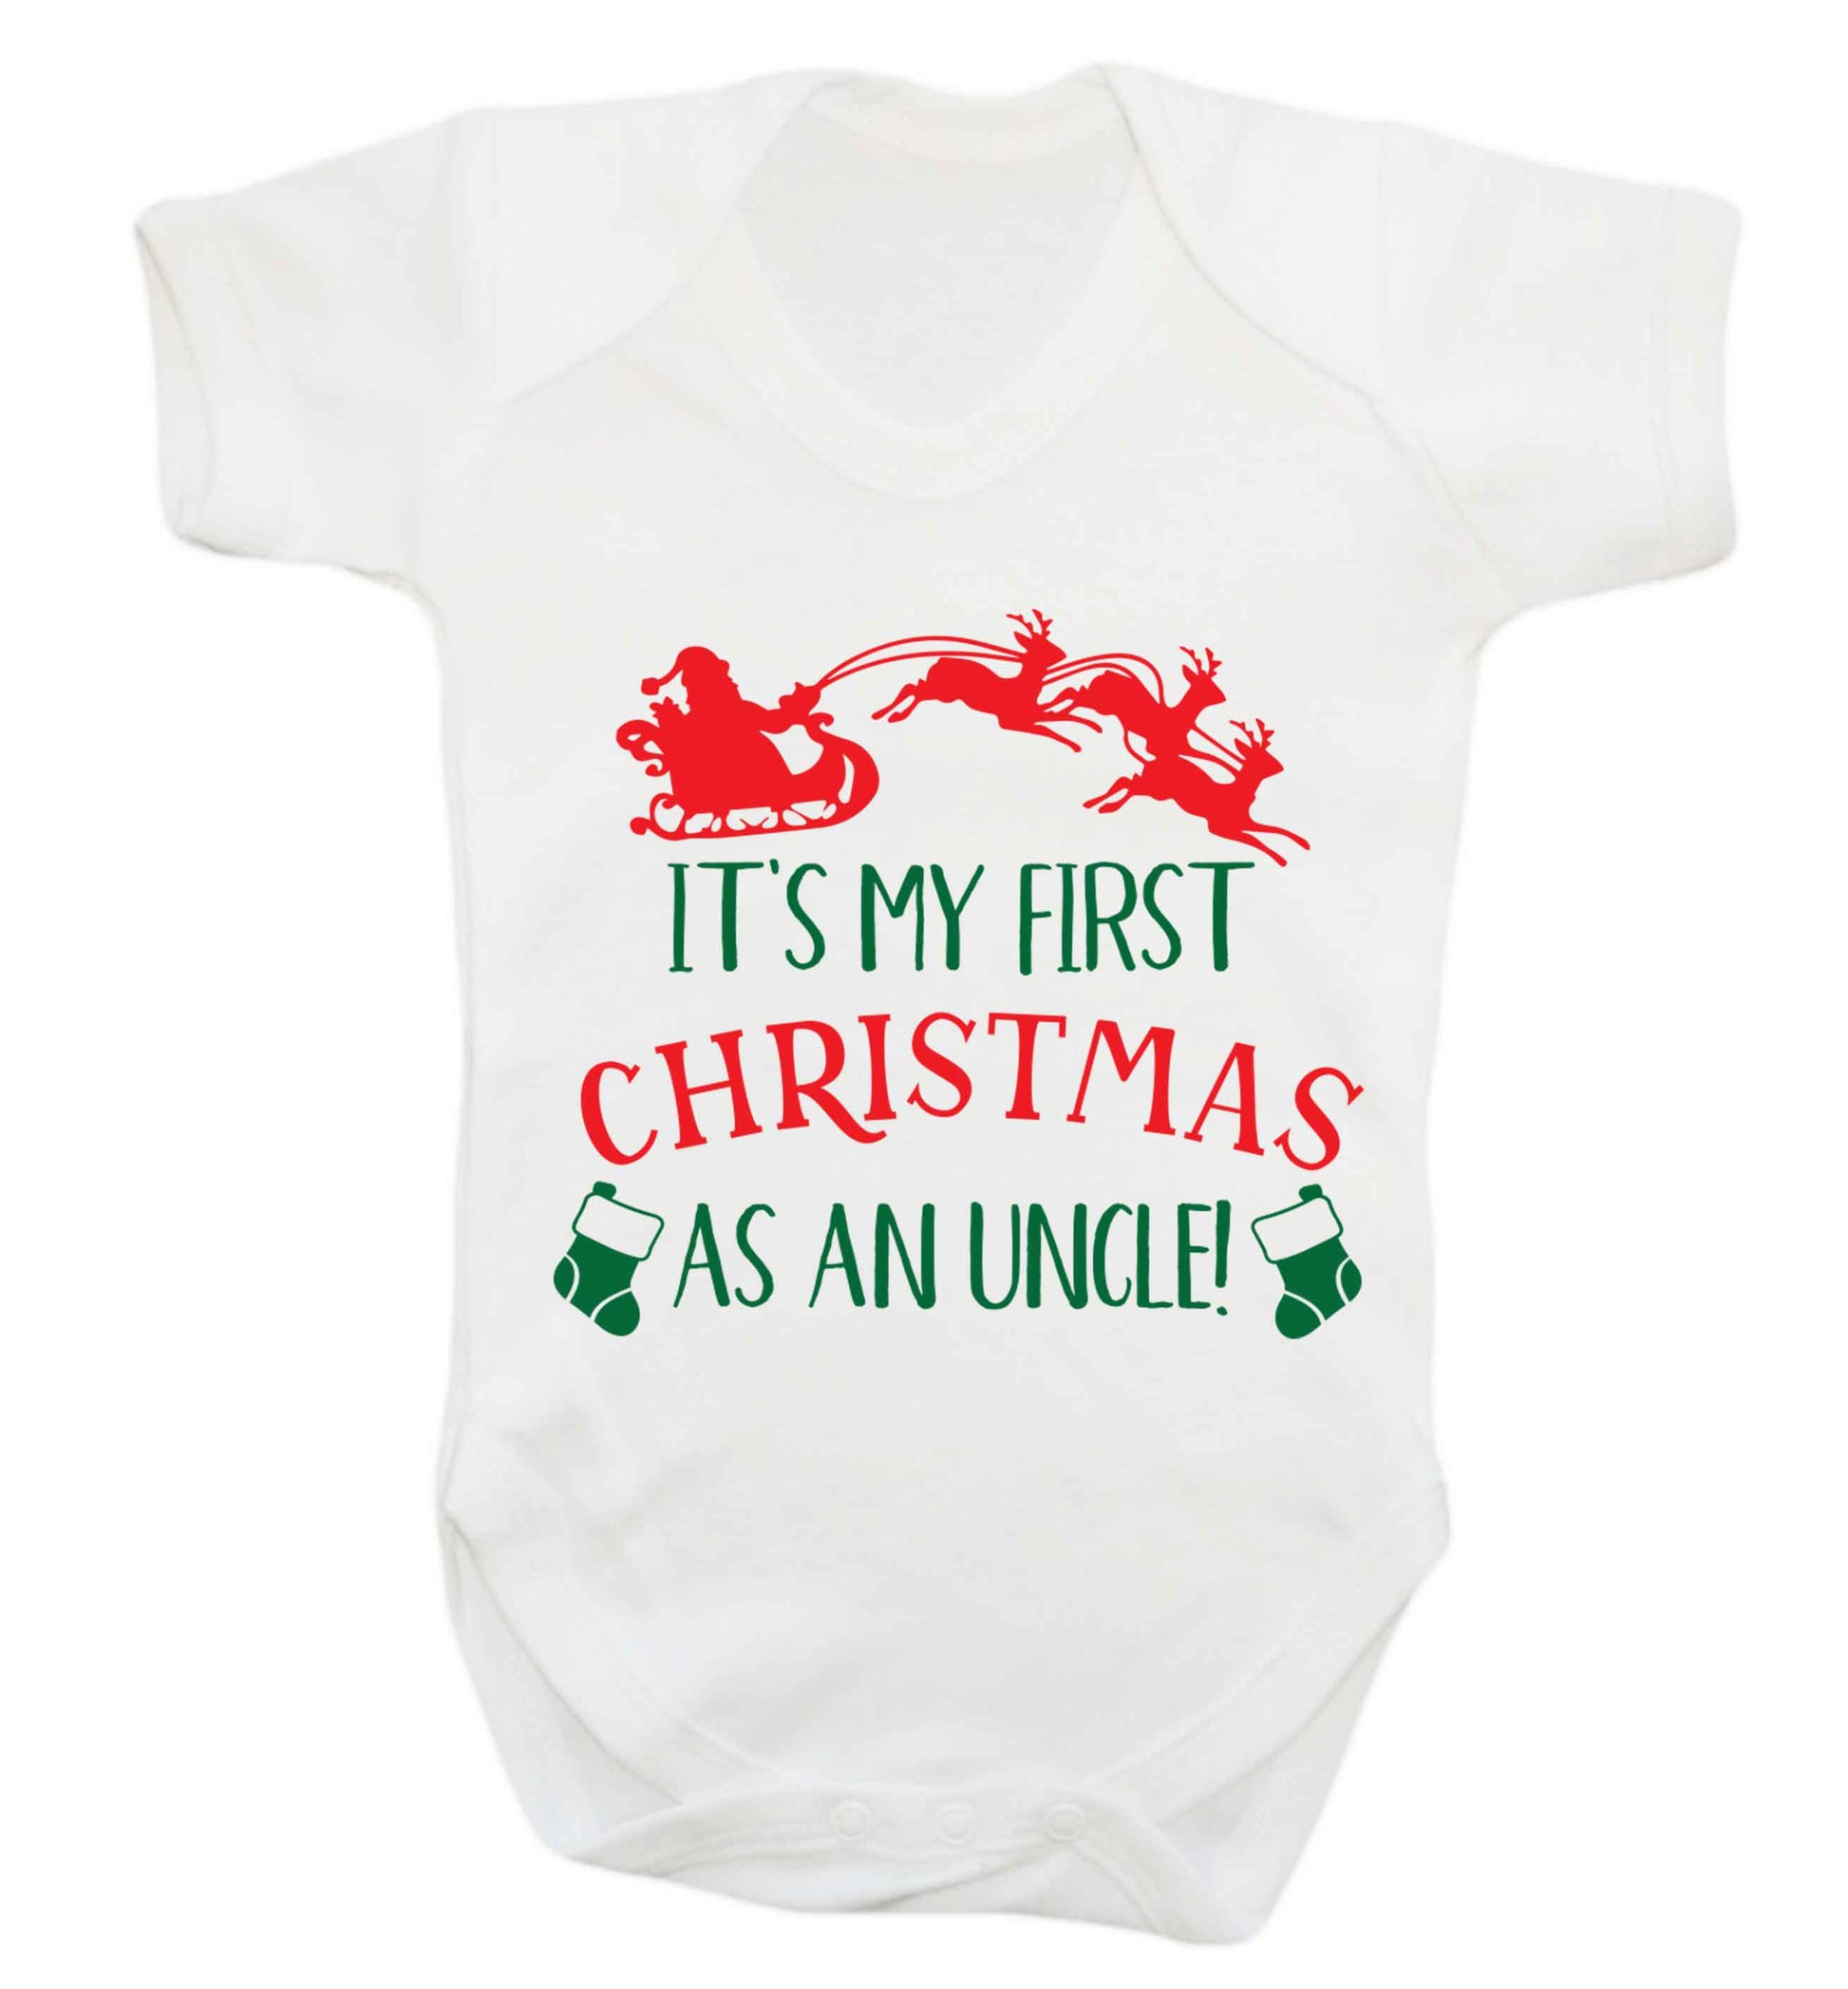 It's my first Christmas as an uncle! Baby Vest white 18-24 months